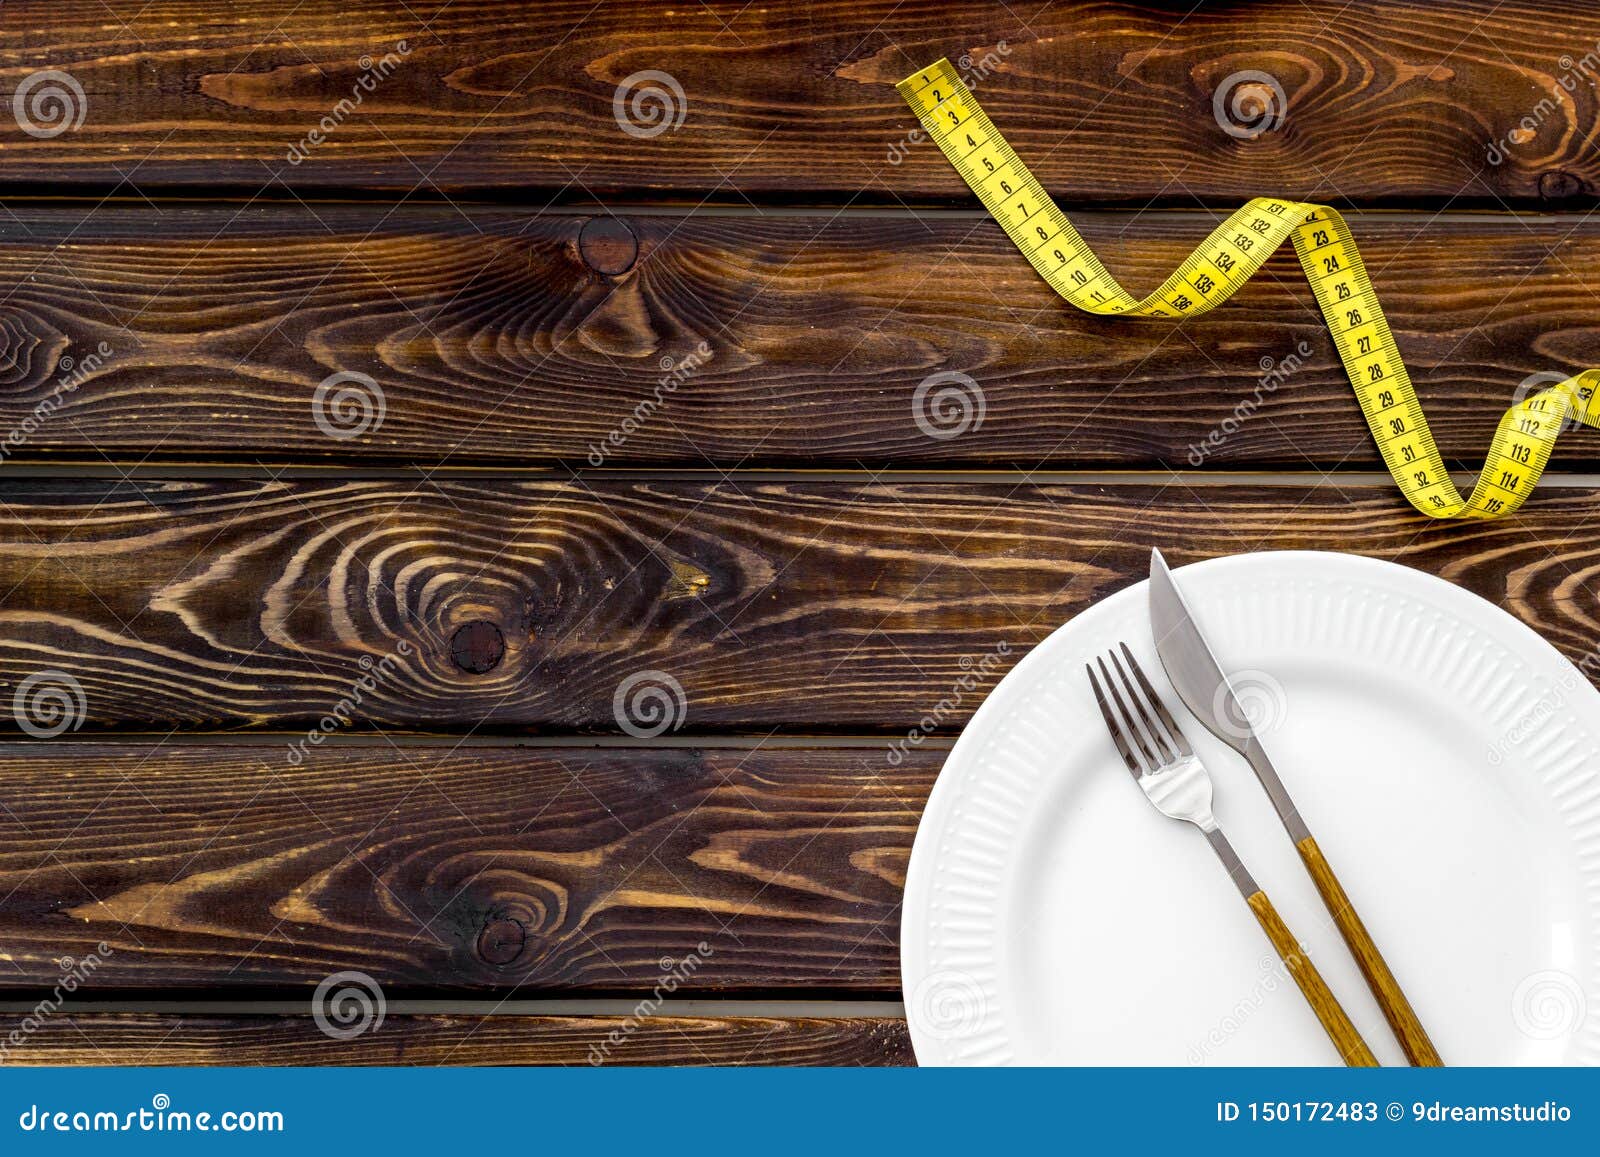 Download Slim Concept With Plate, Flatware And Measuring Tape On ...